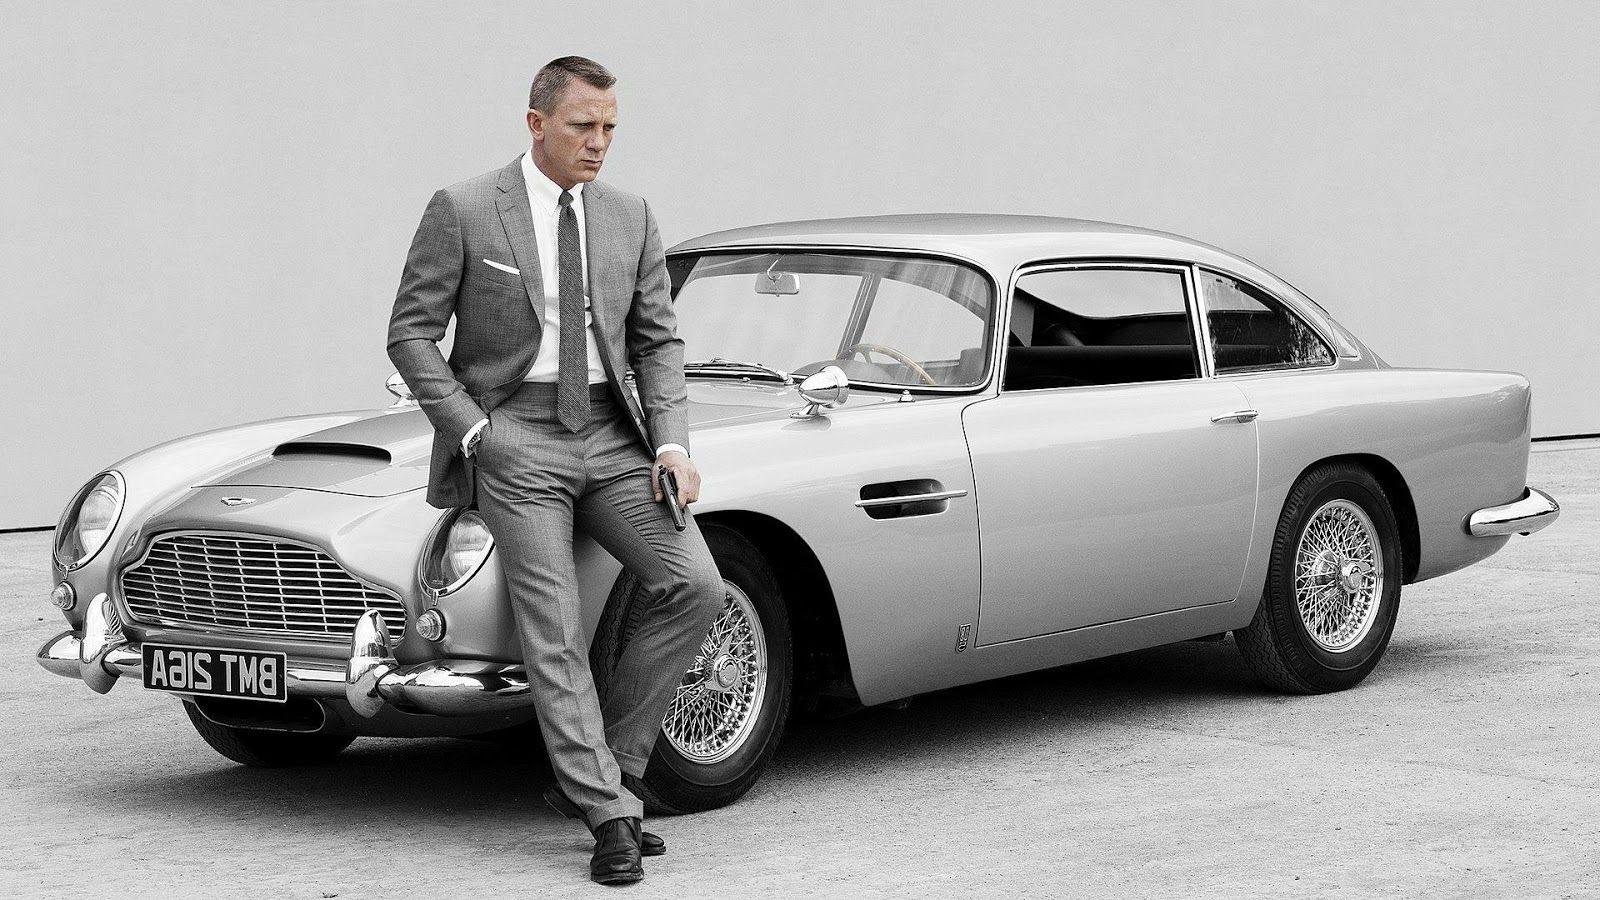 James Bond 007 Movie Cars Image Collection Latest New & Old